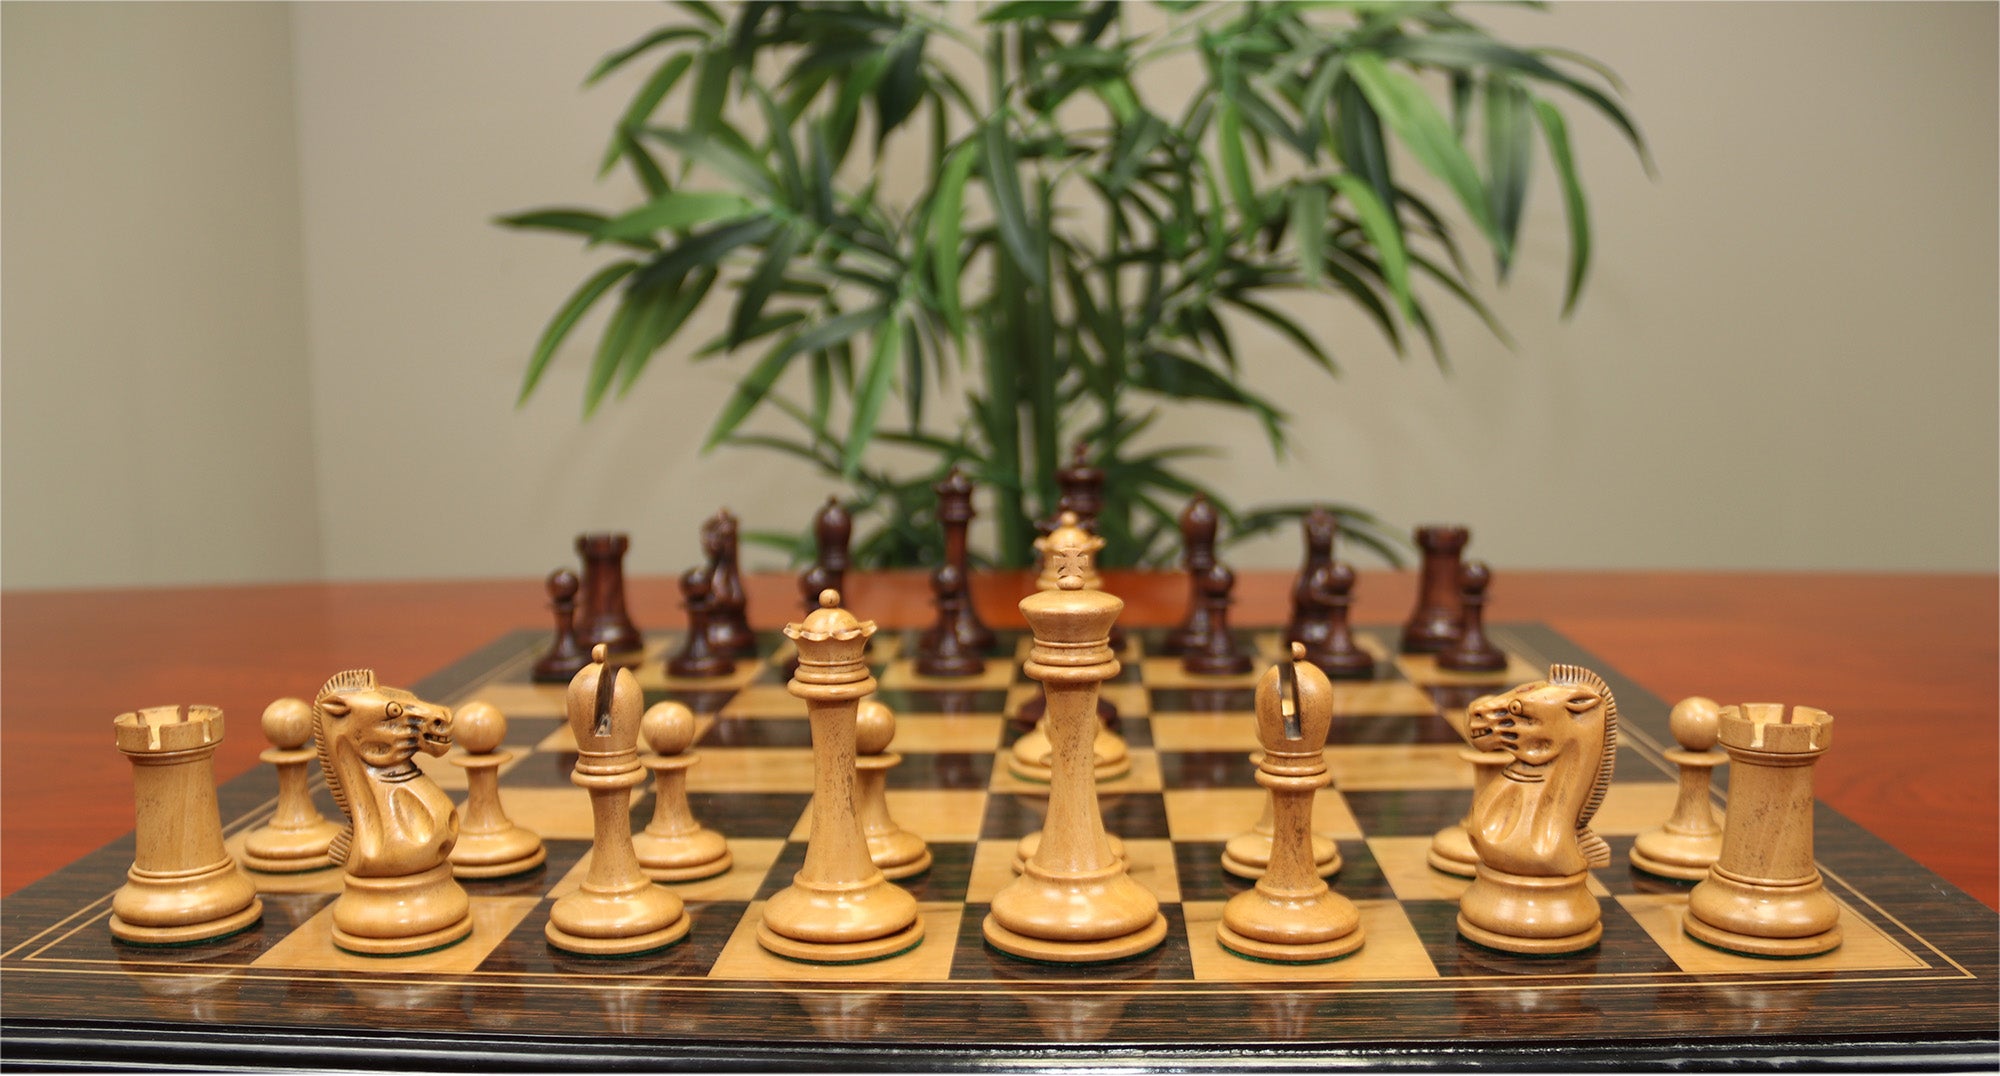 B & Company Reproduction 4.4" Chess set in Distressed/Mahogany Stained Boxwood